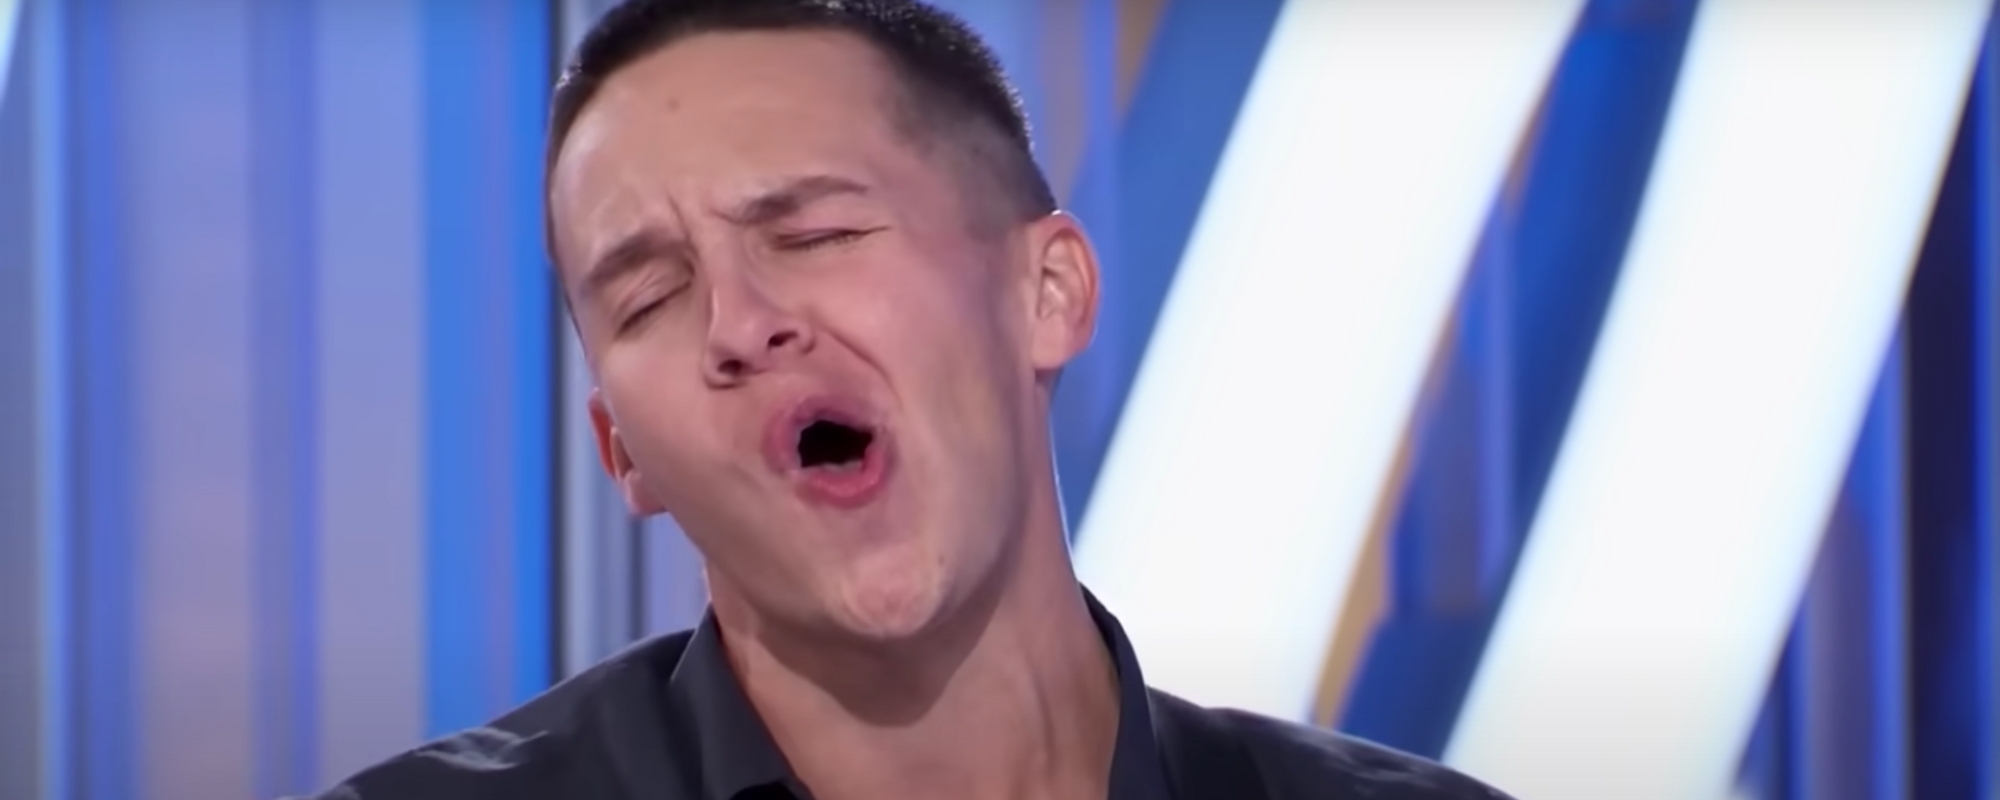 Jack Blocker Is More Than His Viral Facial Expressions—He May Be the ‘American Idol’ Favorite